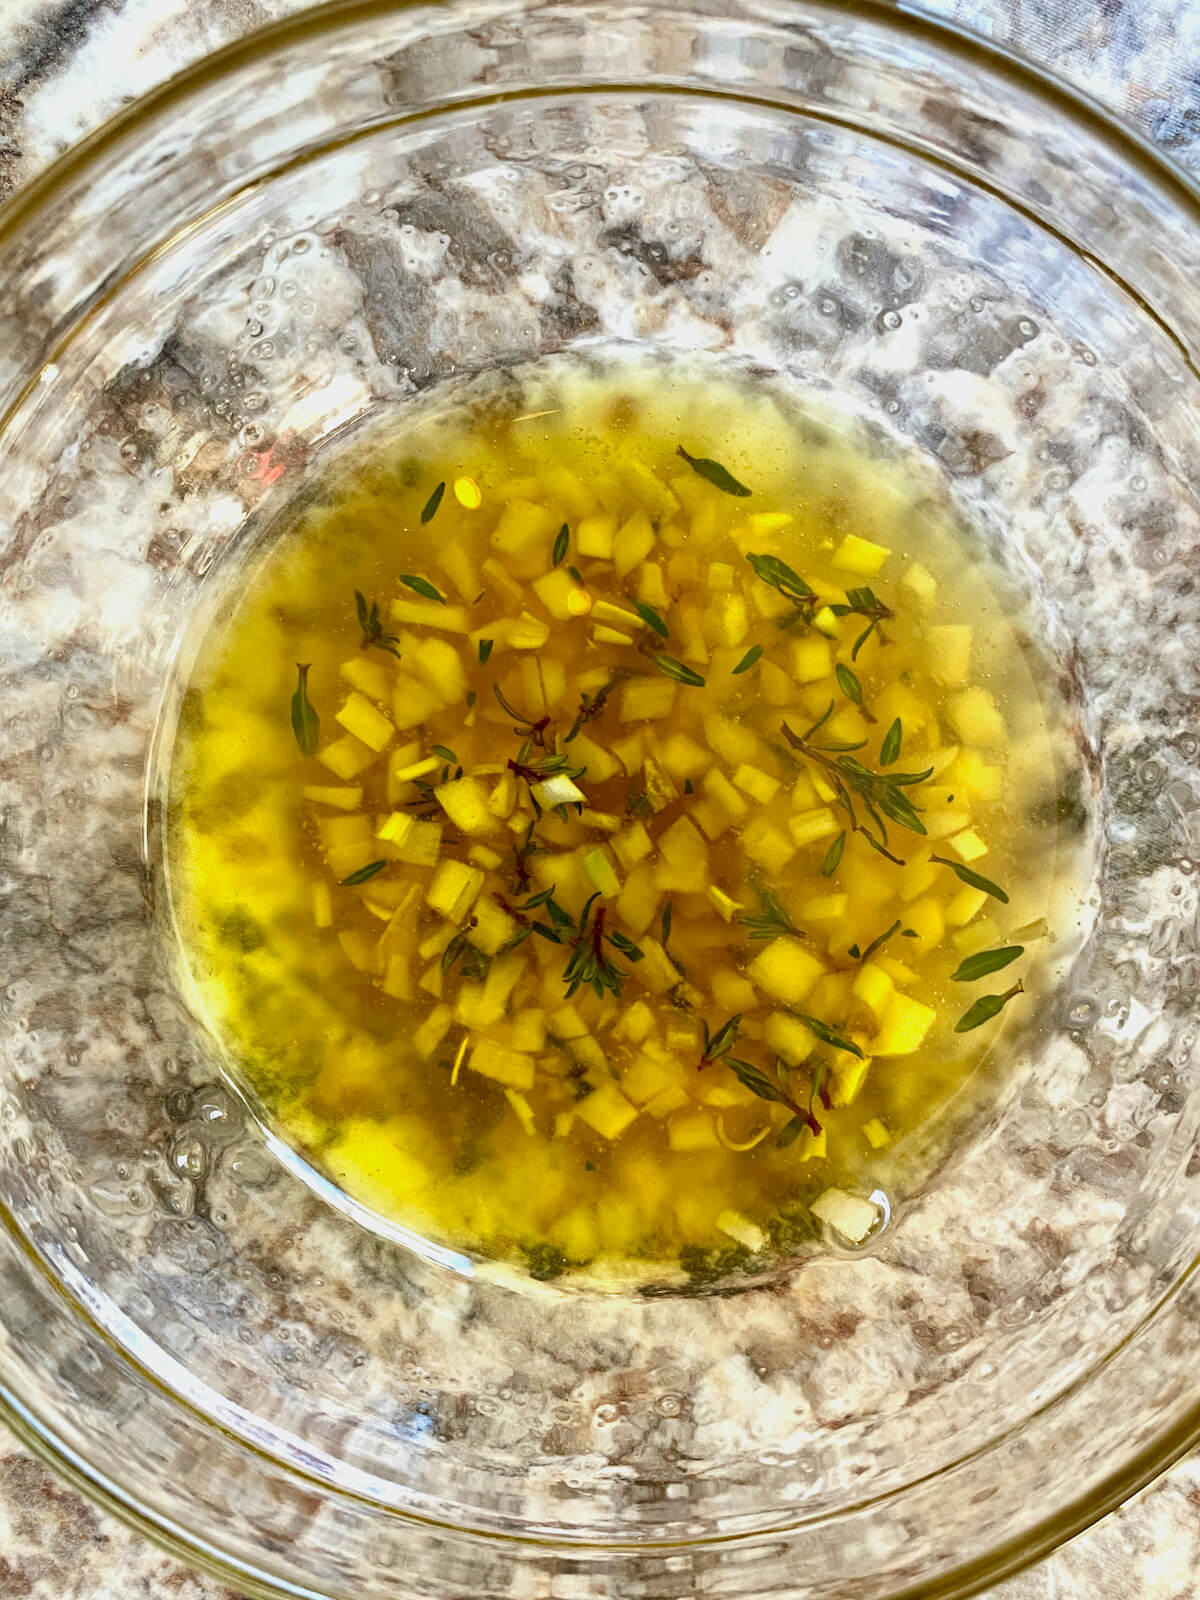 Olive oil, honey, minced garlic, and fresh thyme leaves mixed together in a small glass mixing bowl.